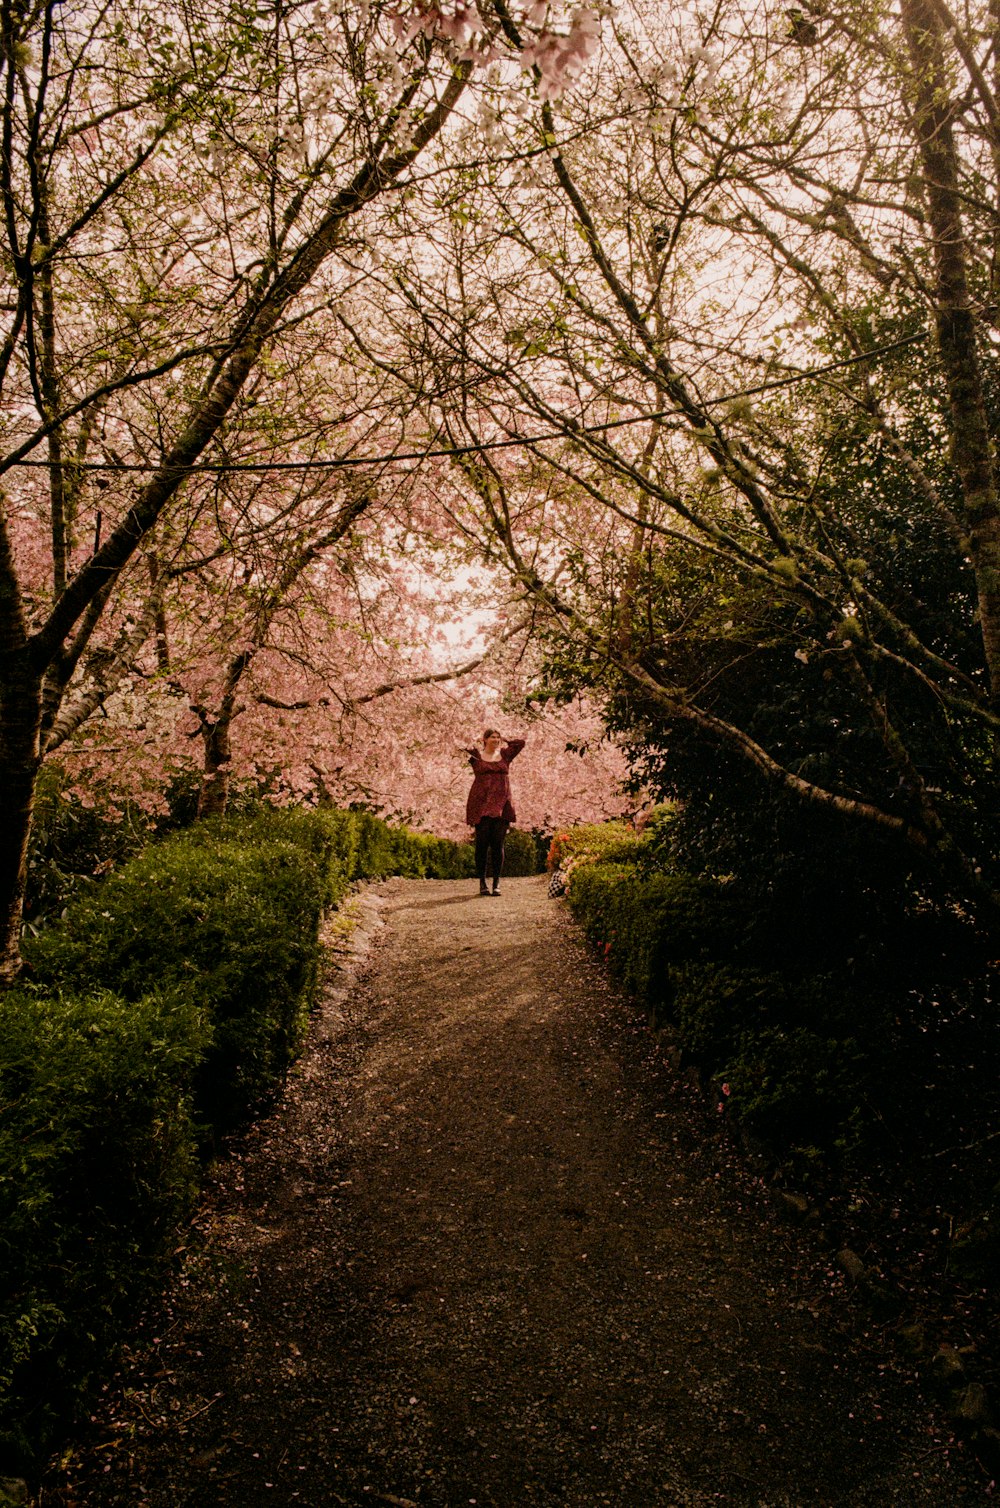 a person walking down a path with trees in the background